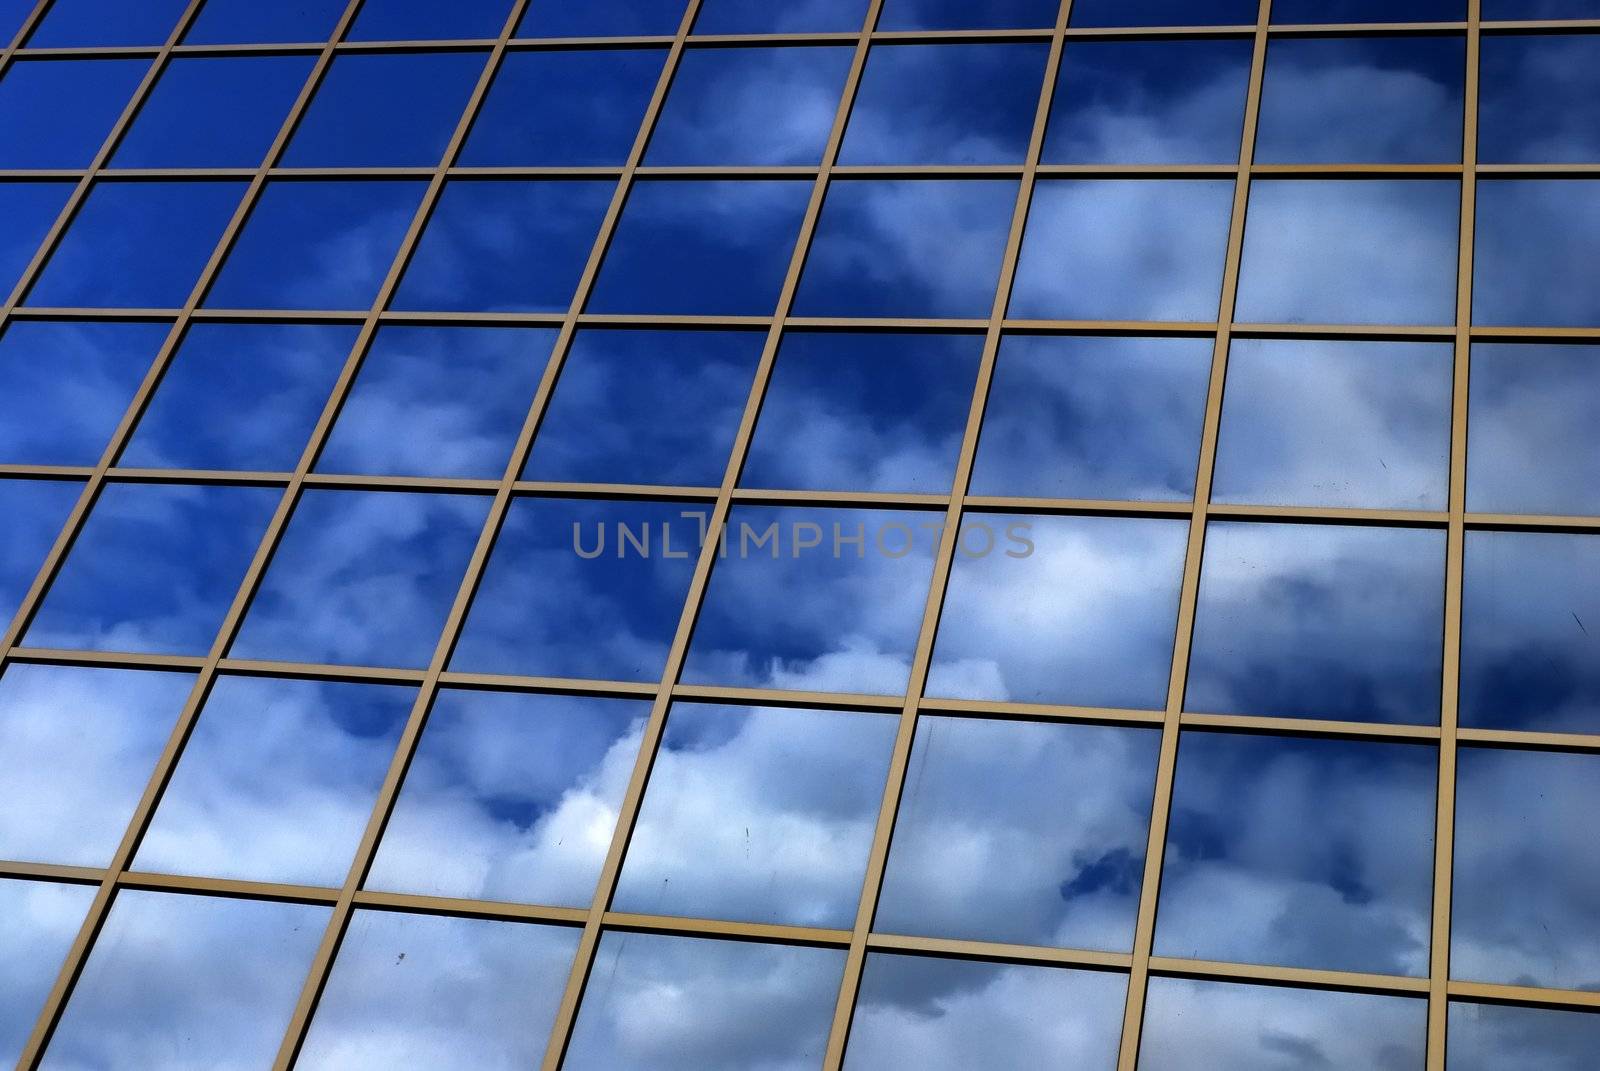 a mirror reflection of sky and clouds is in the windows of building